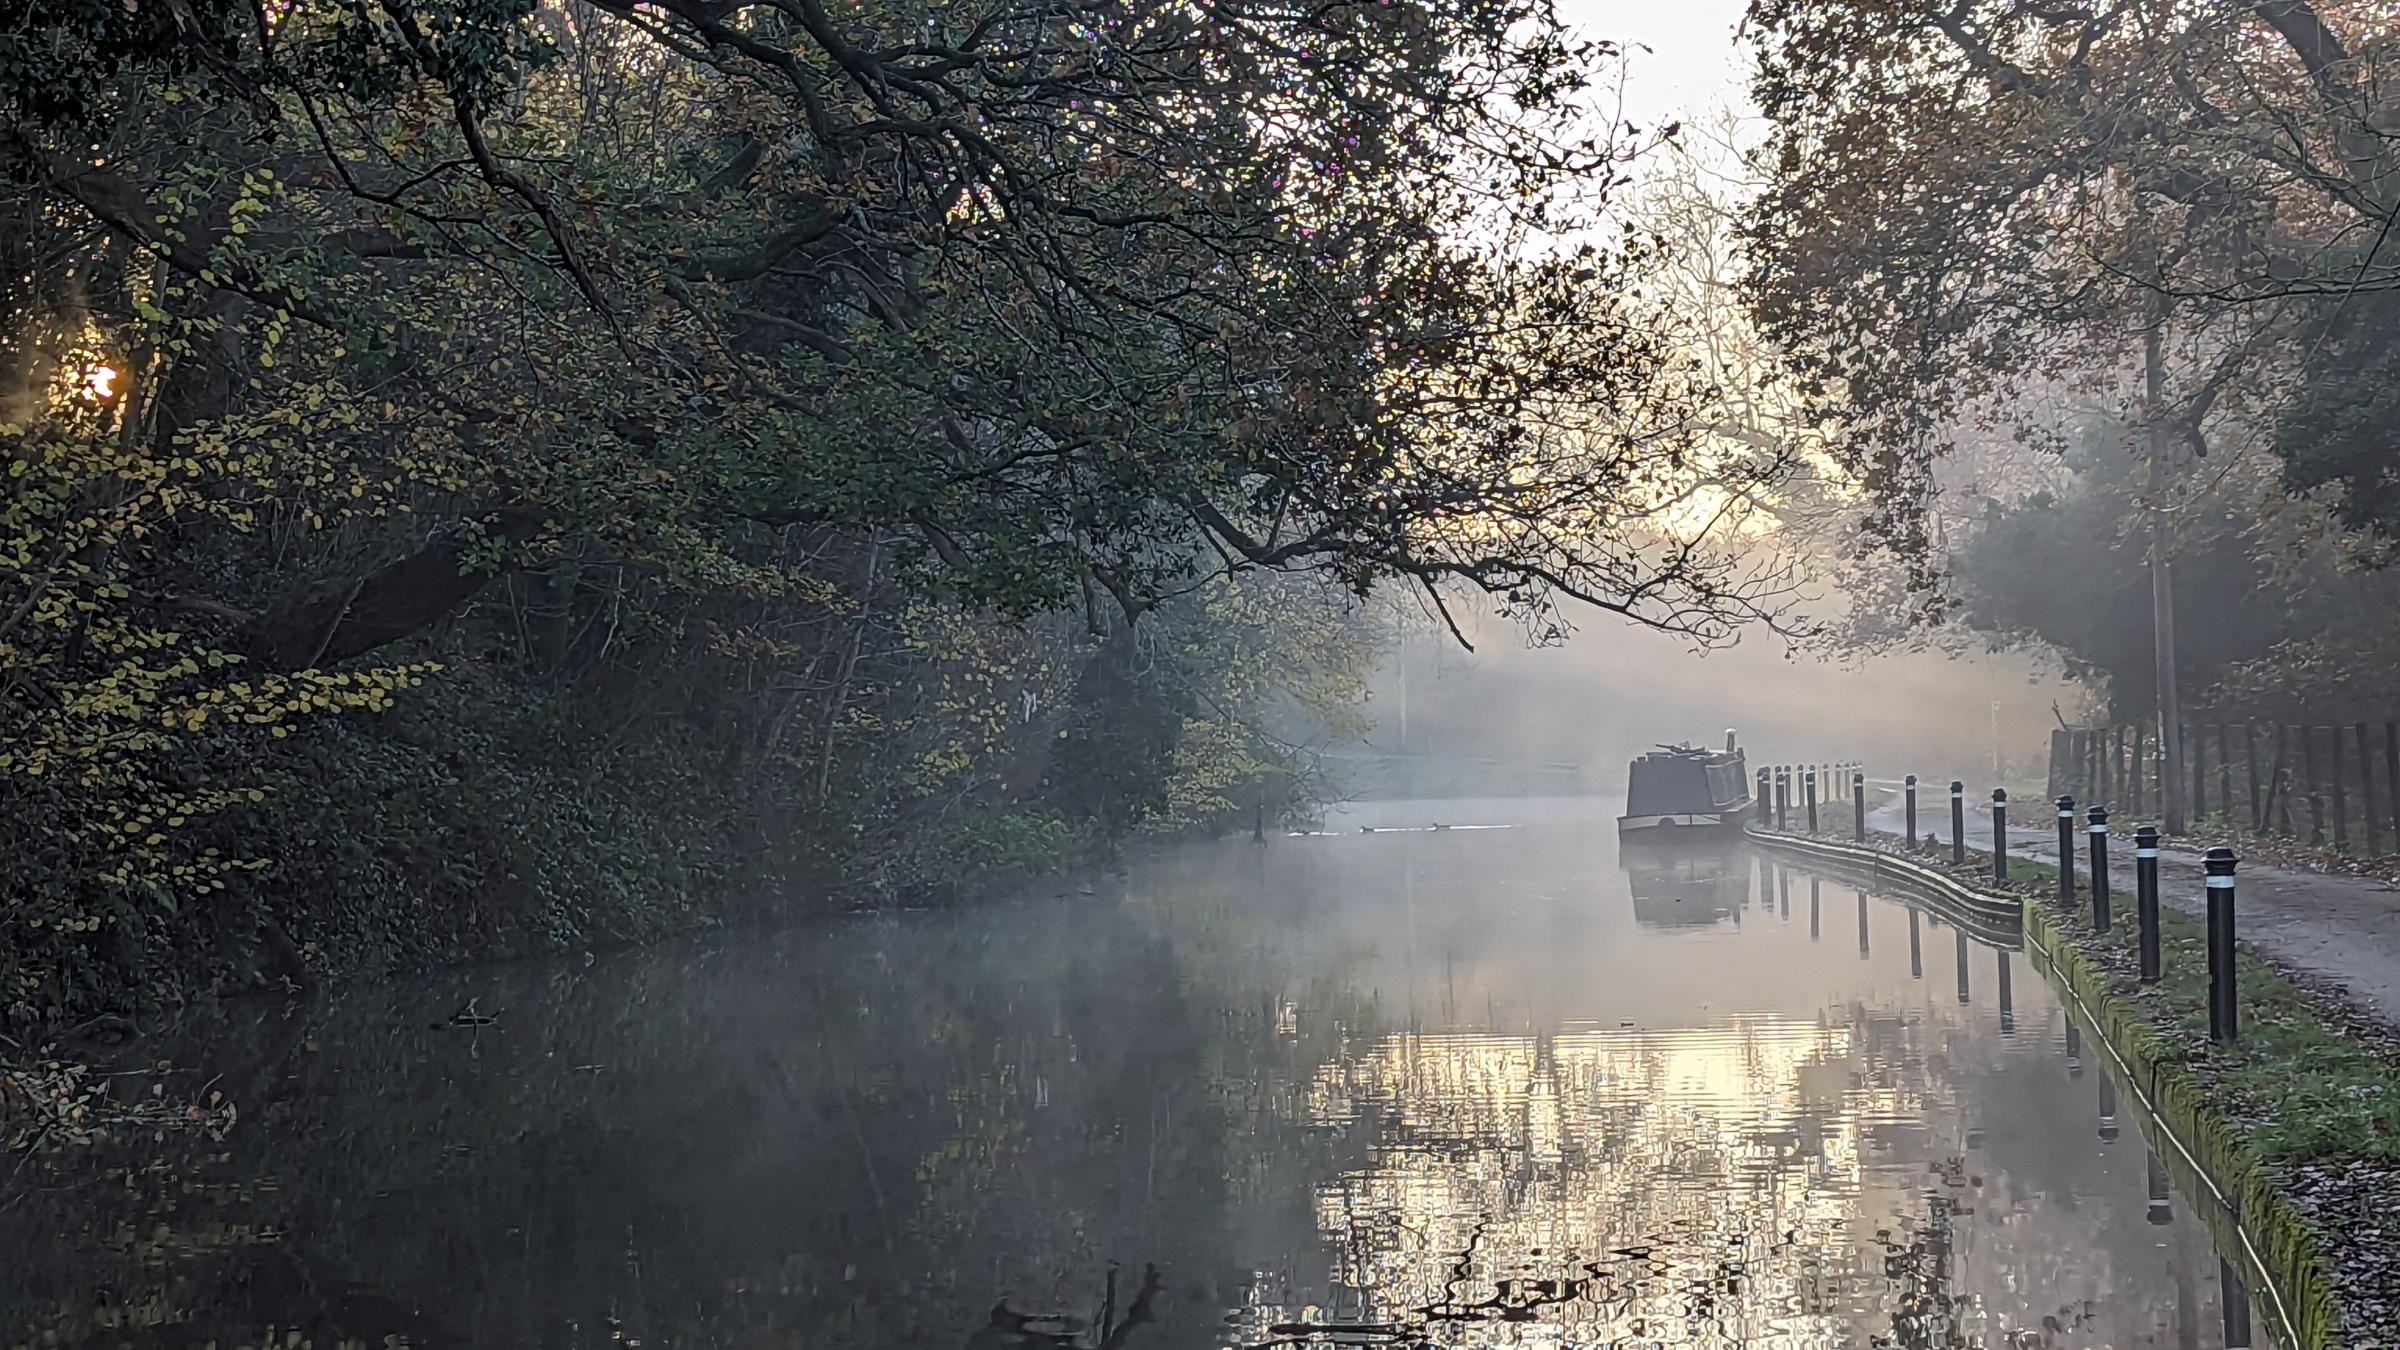 Misty morning on the Trent and Mersey canal